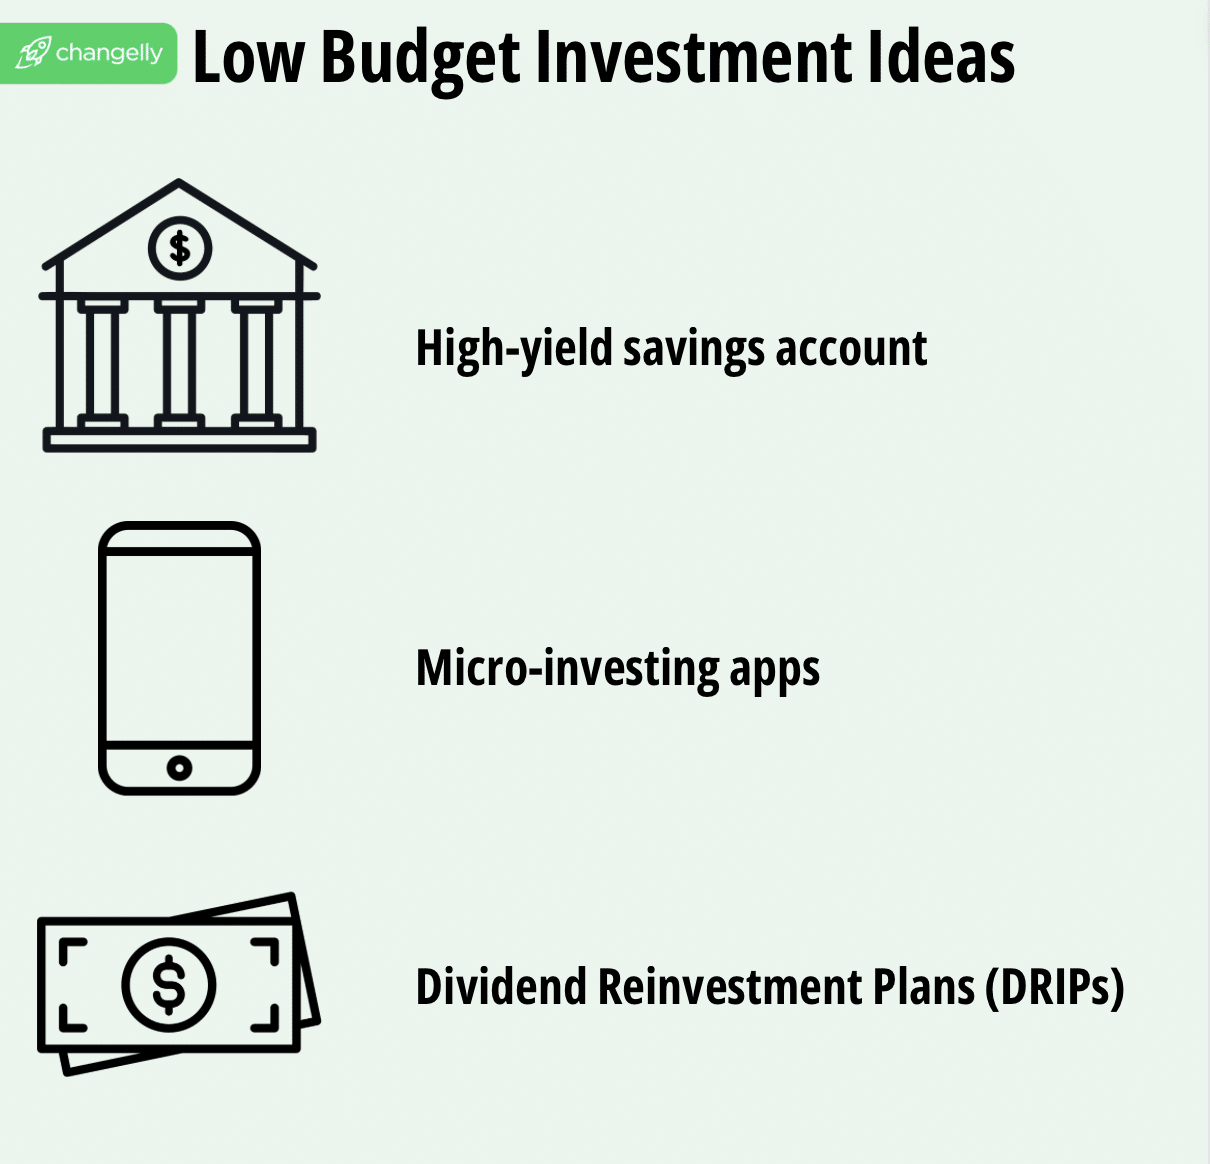 Low budget investment ideas